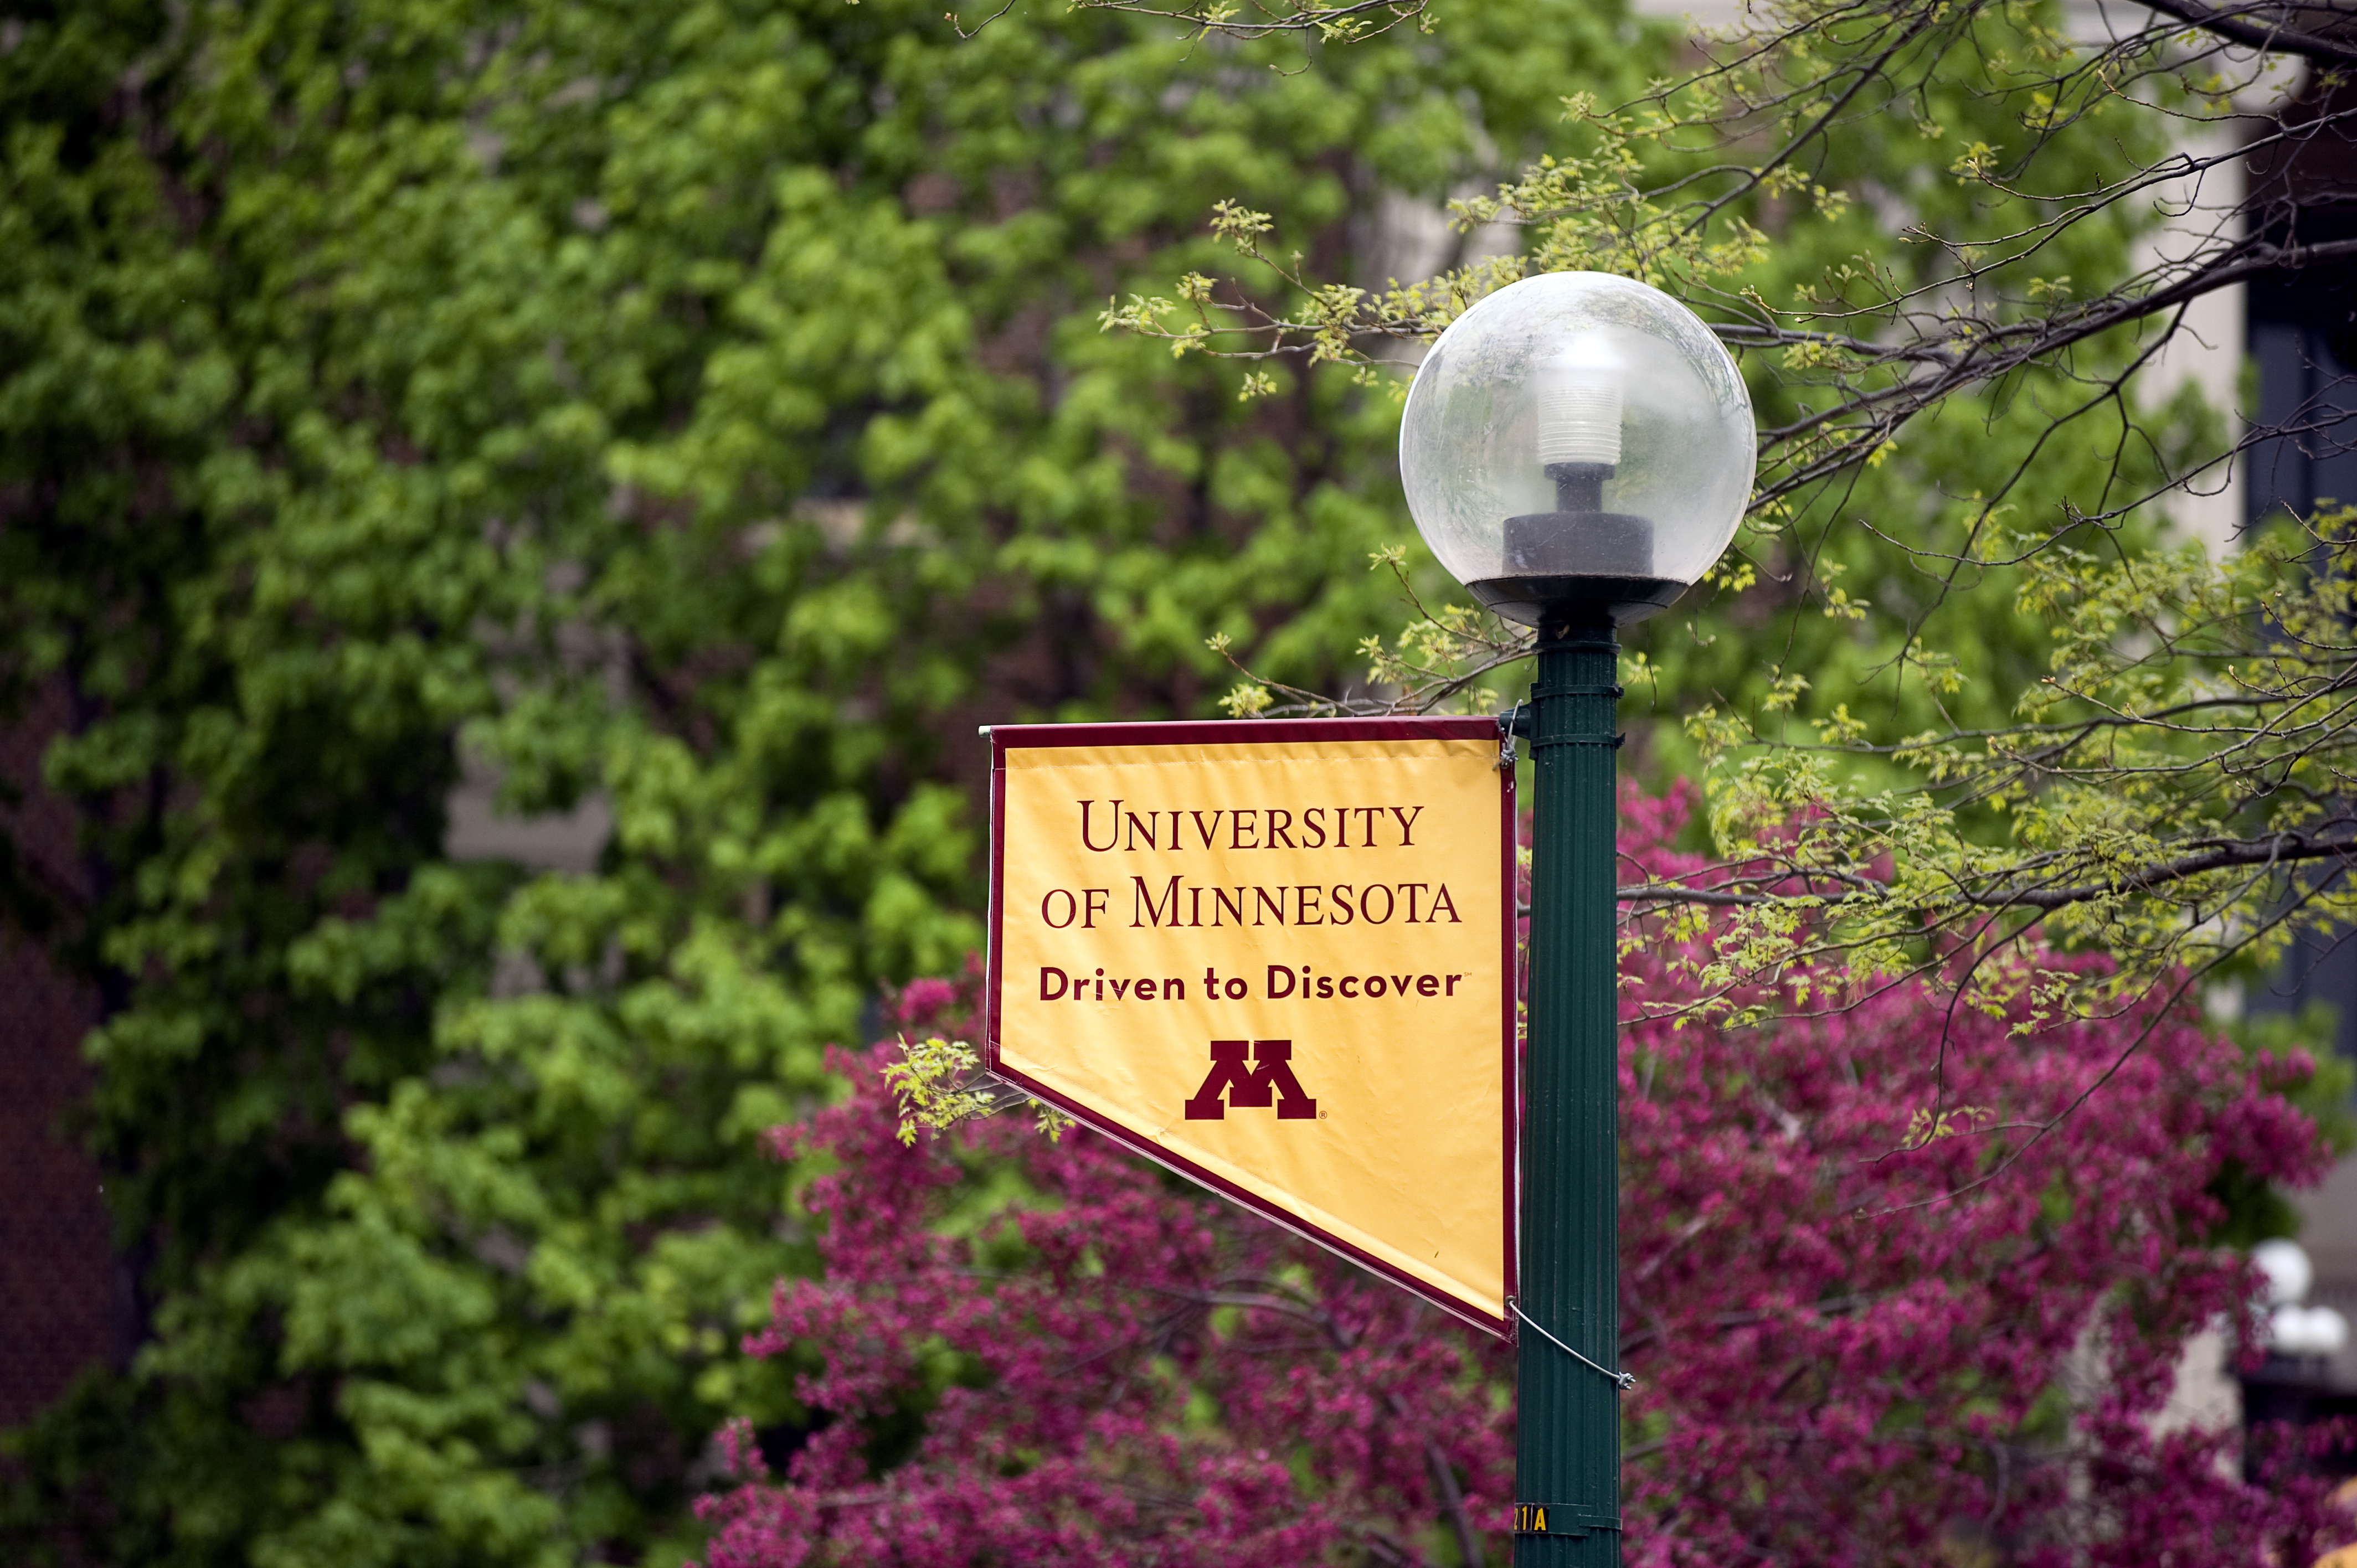 A lamp post on campus with a University of Minnesota gold and maroon flag.